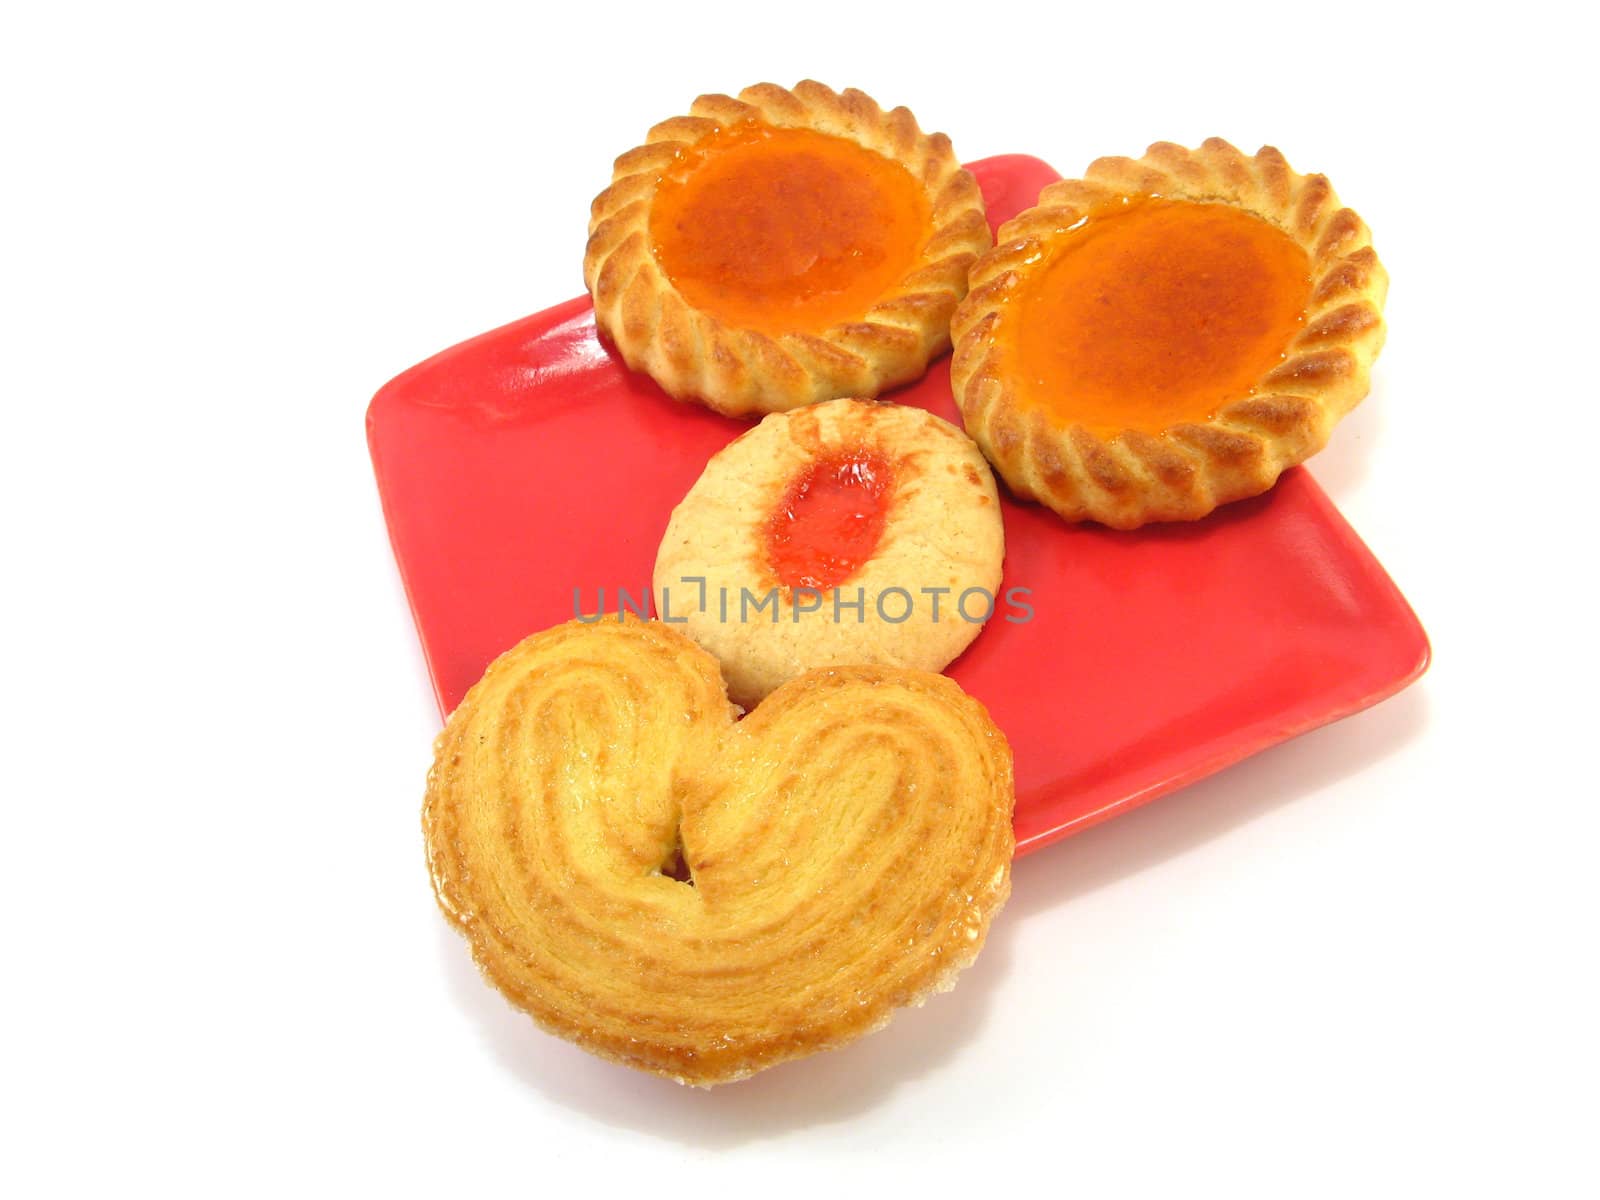 biscuit head on a plate over a white background